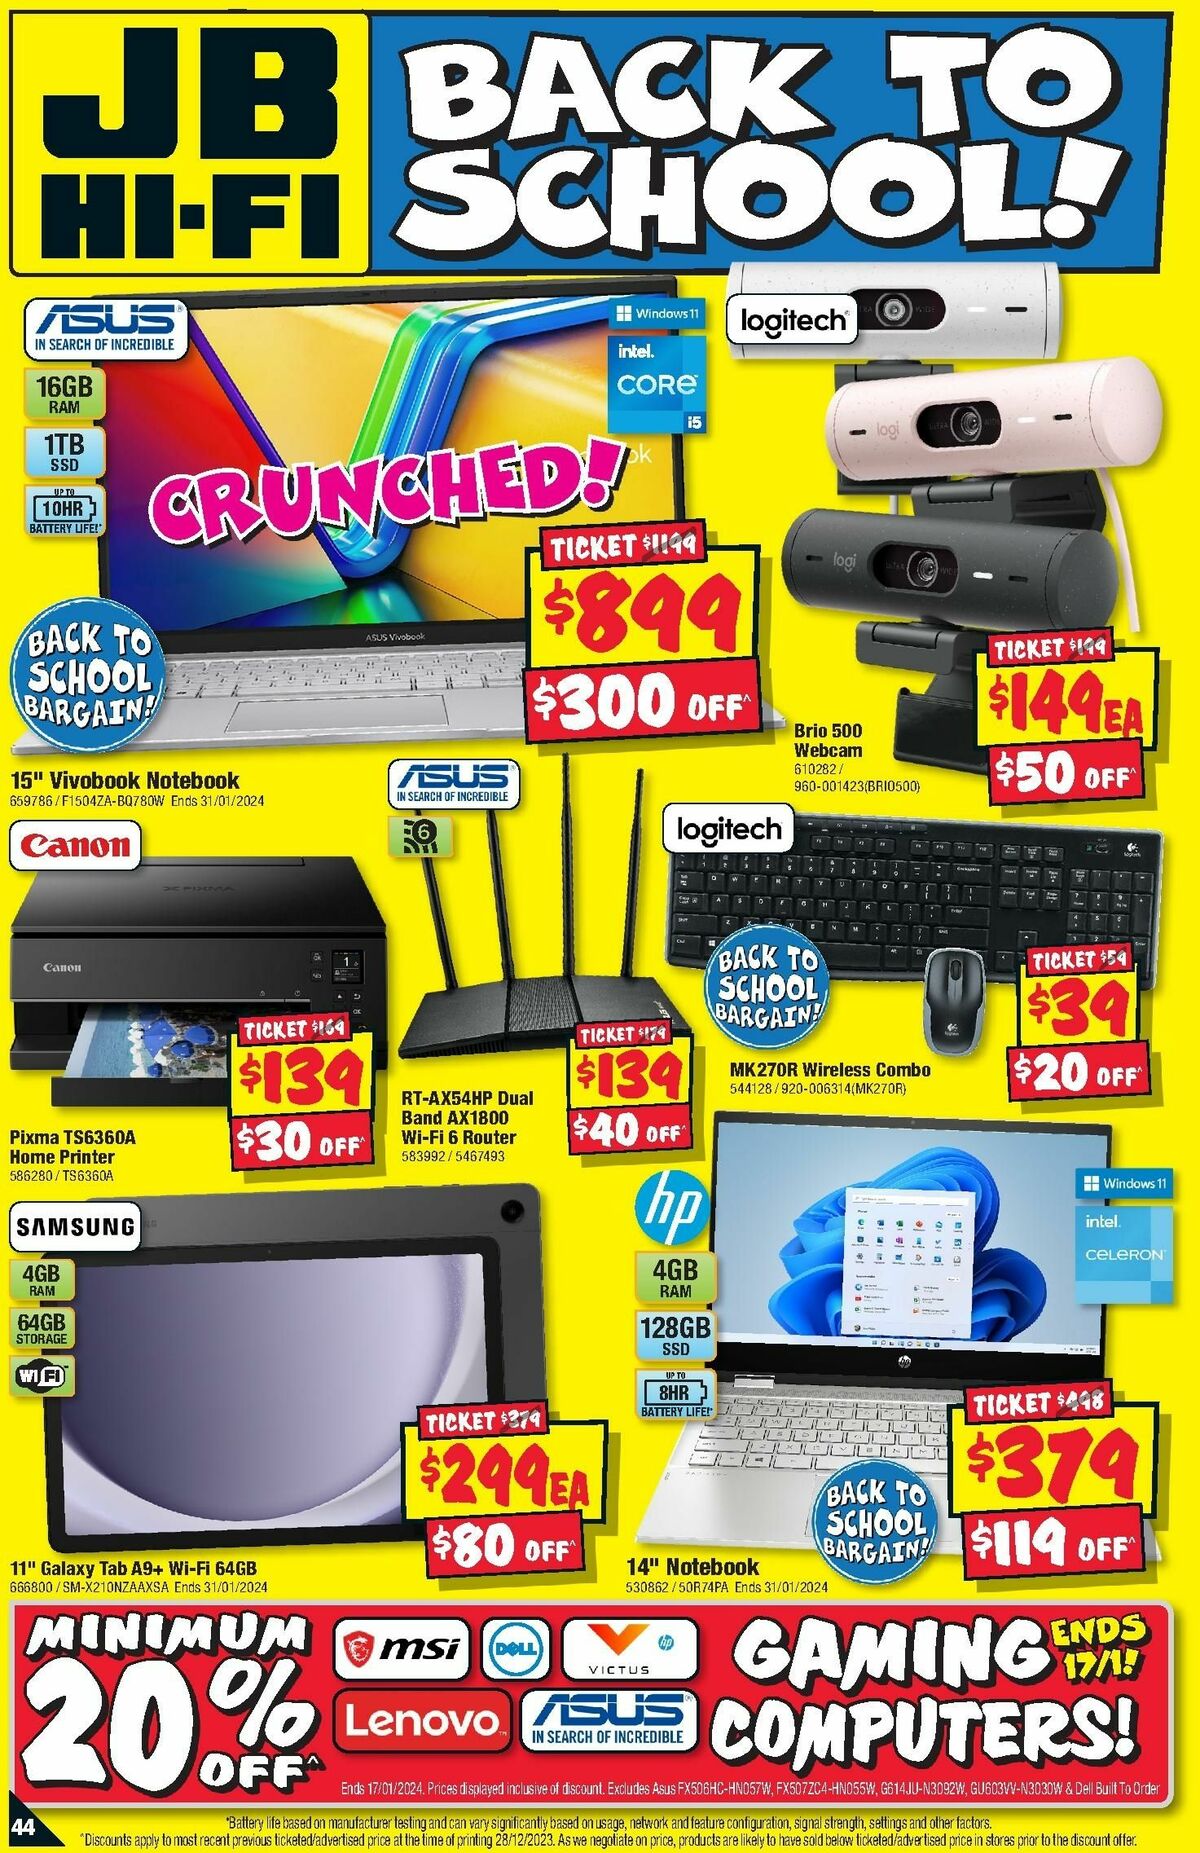 JB Hi-Fi Back to School Computers Catalogues from 11 January